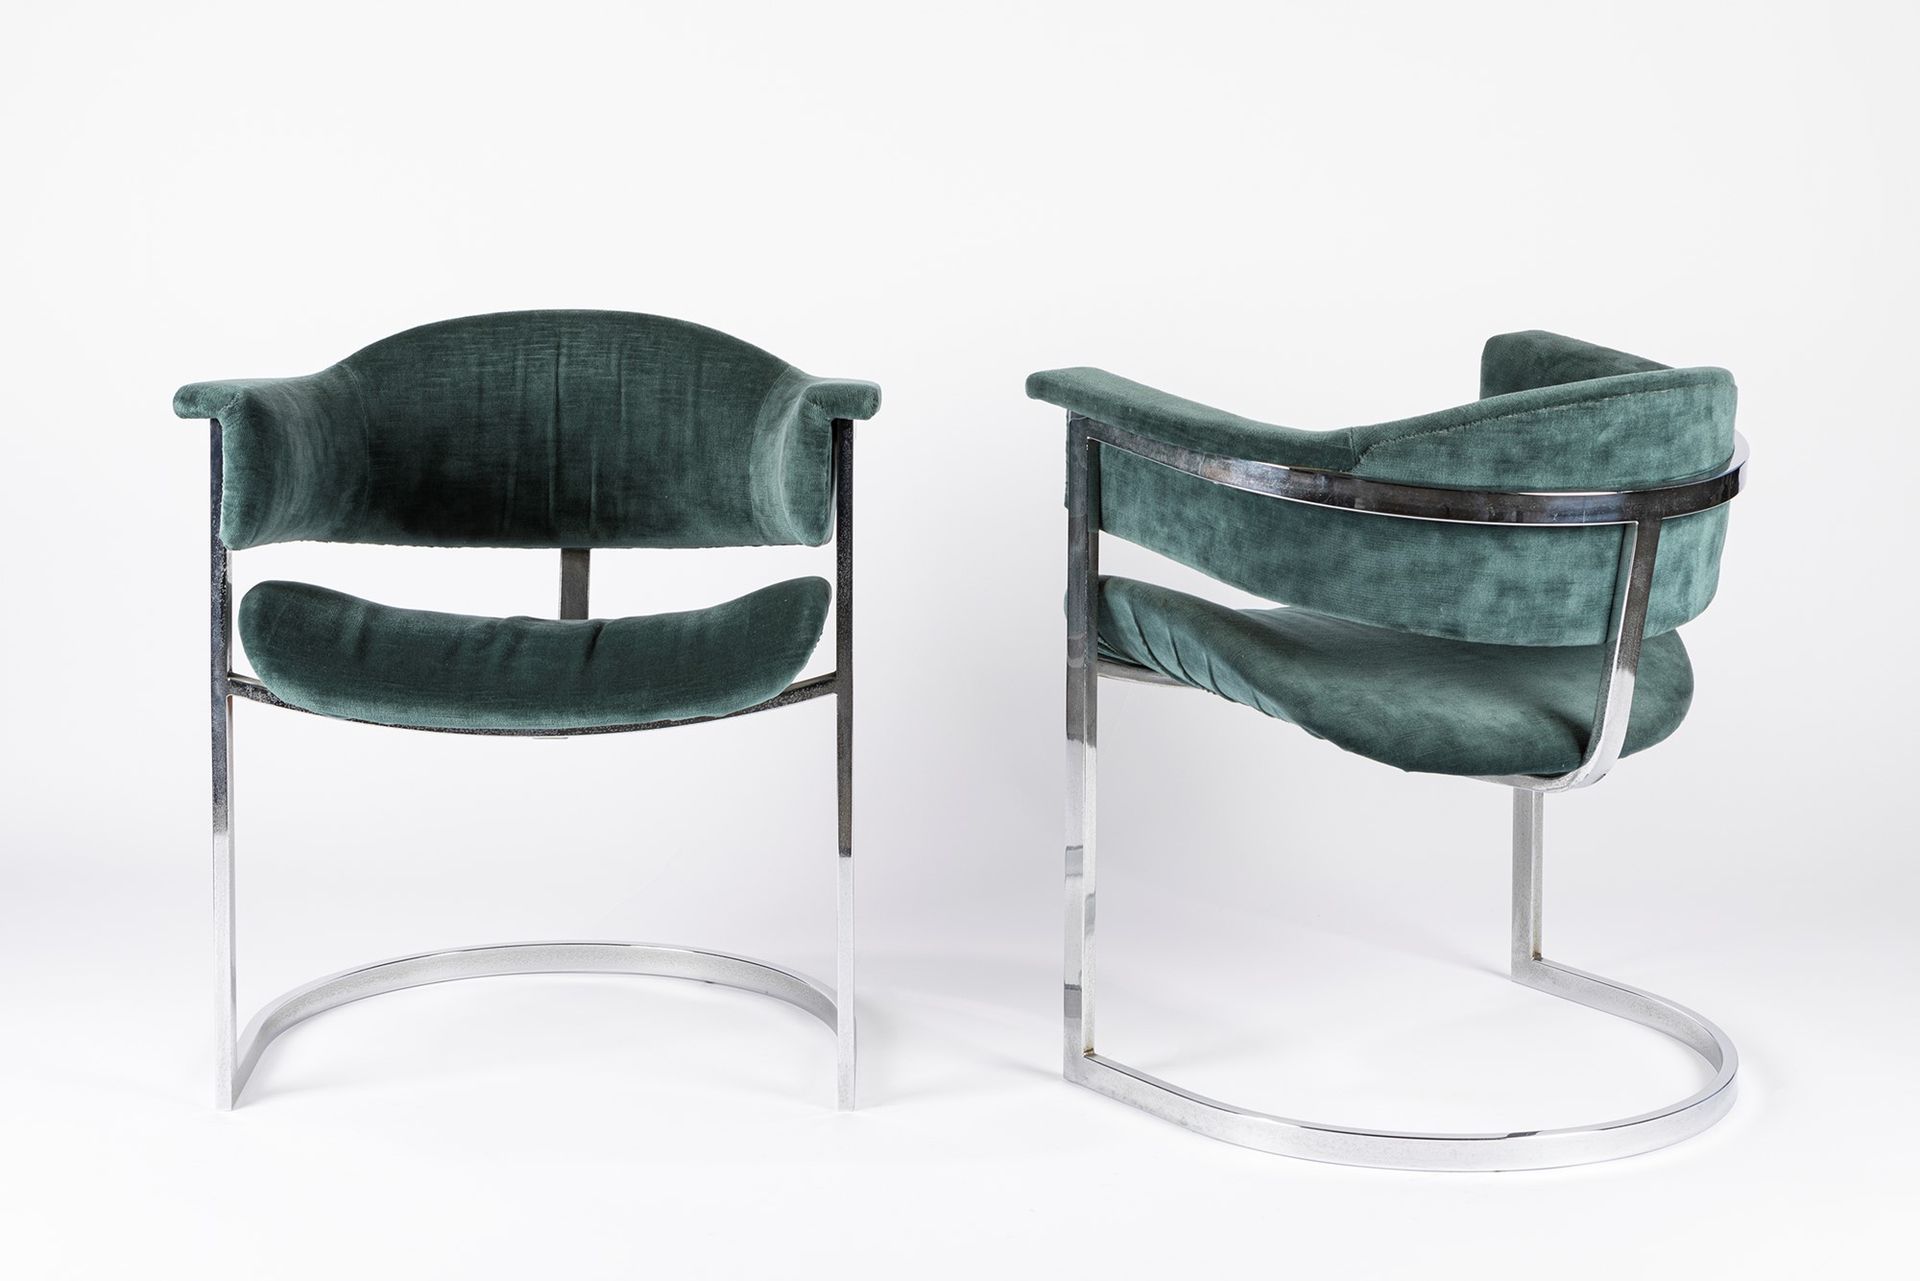 Vittorio introini Two chairs, 1970 ca.

63×43×56 cm
chromed steel and velvet arm&hellip;